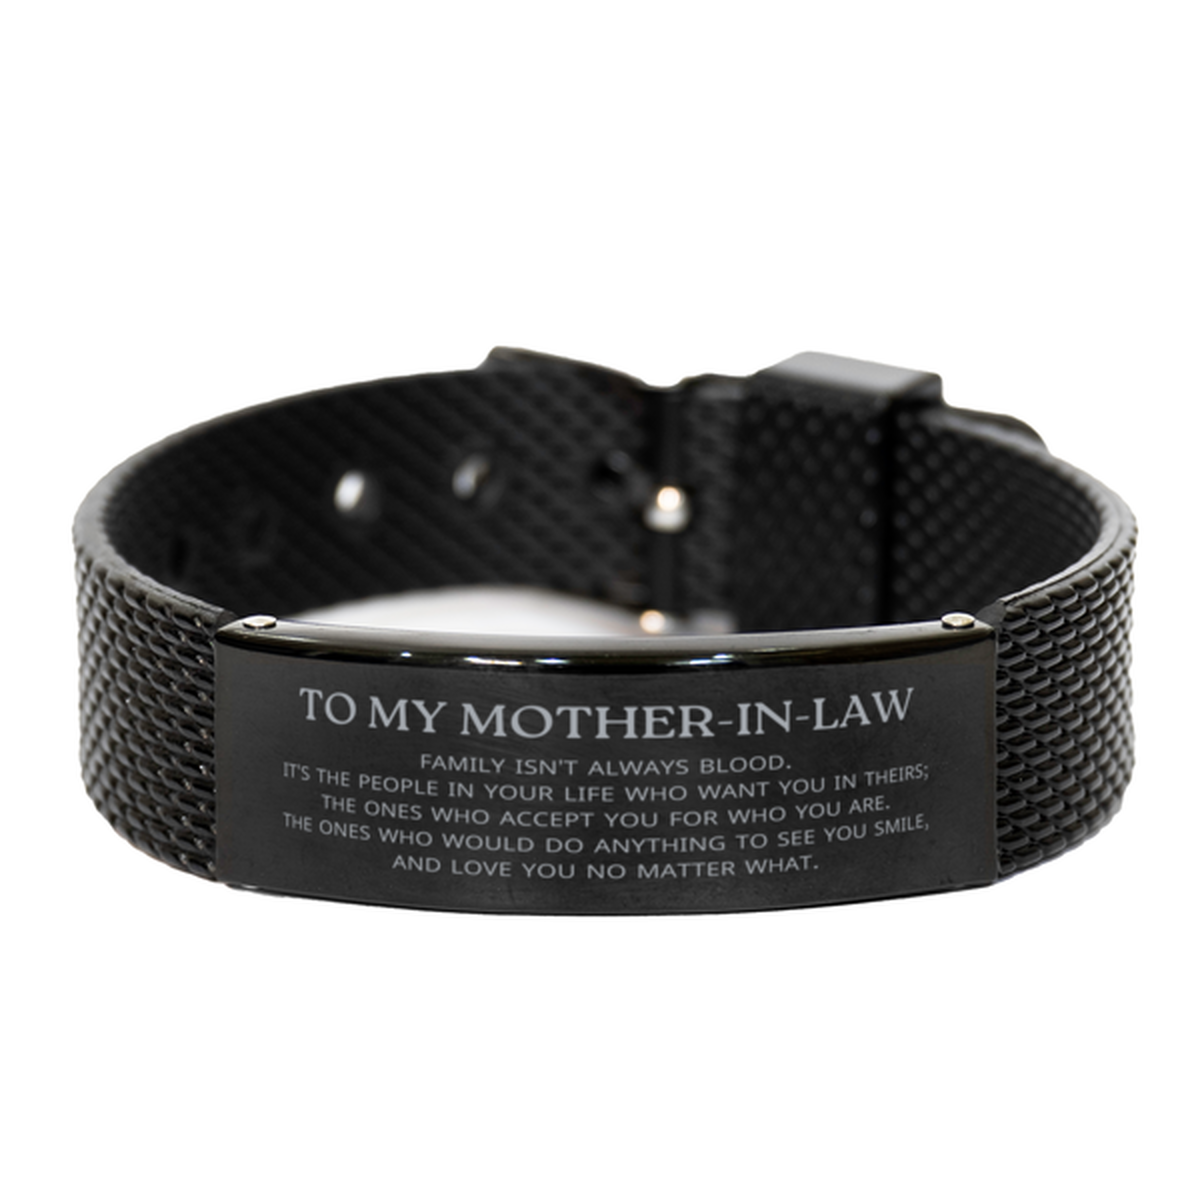 To My Mother-In-Law Gifts, Family isn't always blood, Mother-In-Law Black Shark Mesh Bracelet, Birthday Christmas Unique Present For Mother-In-Law